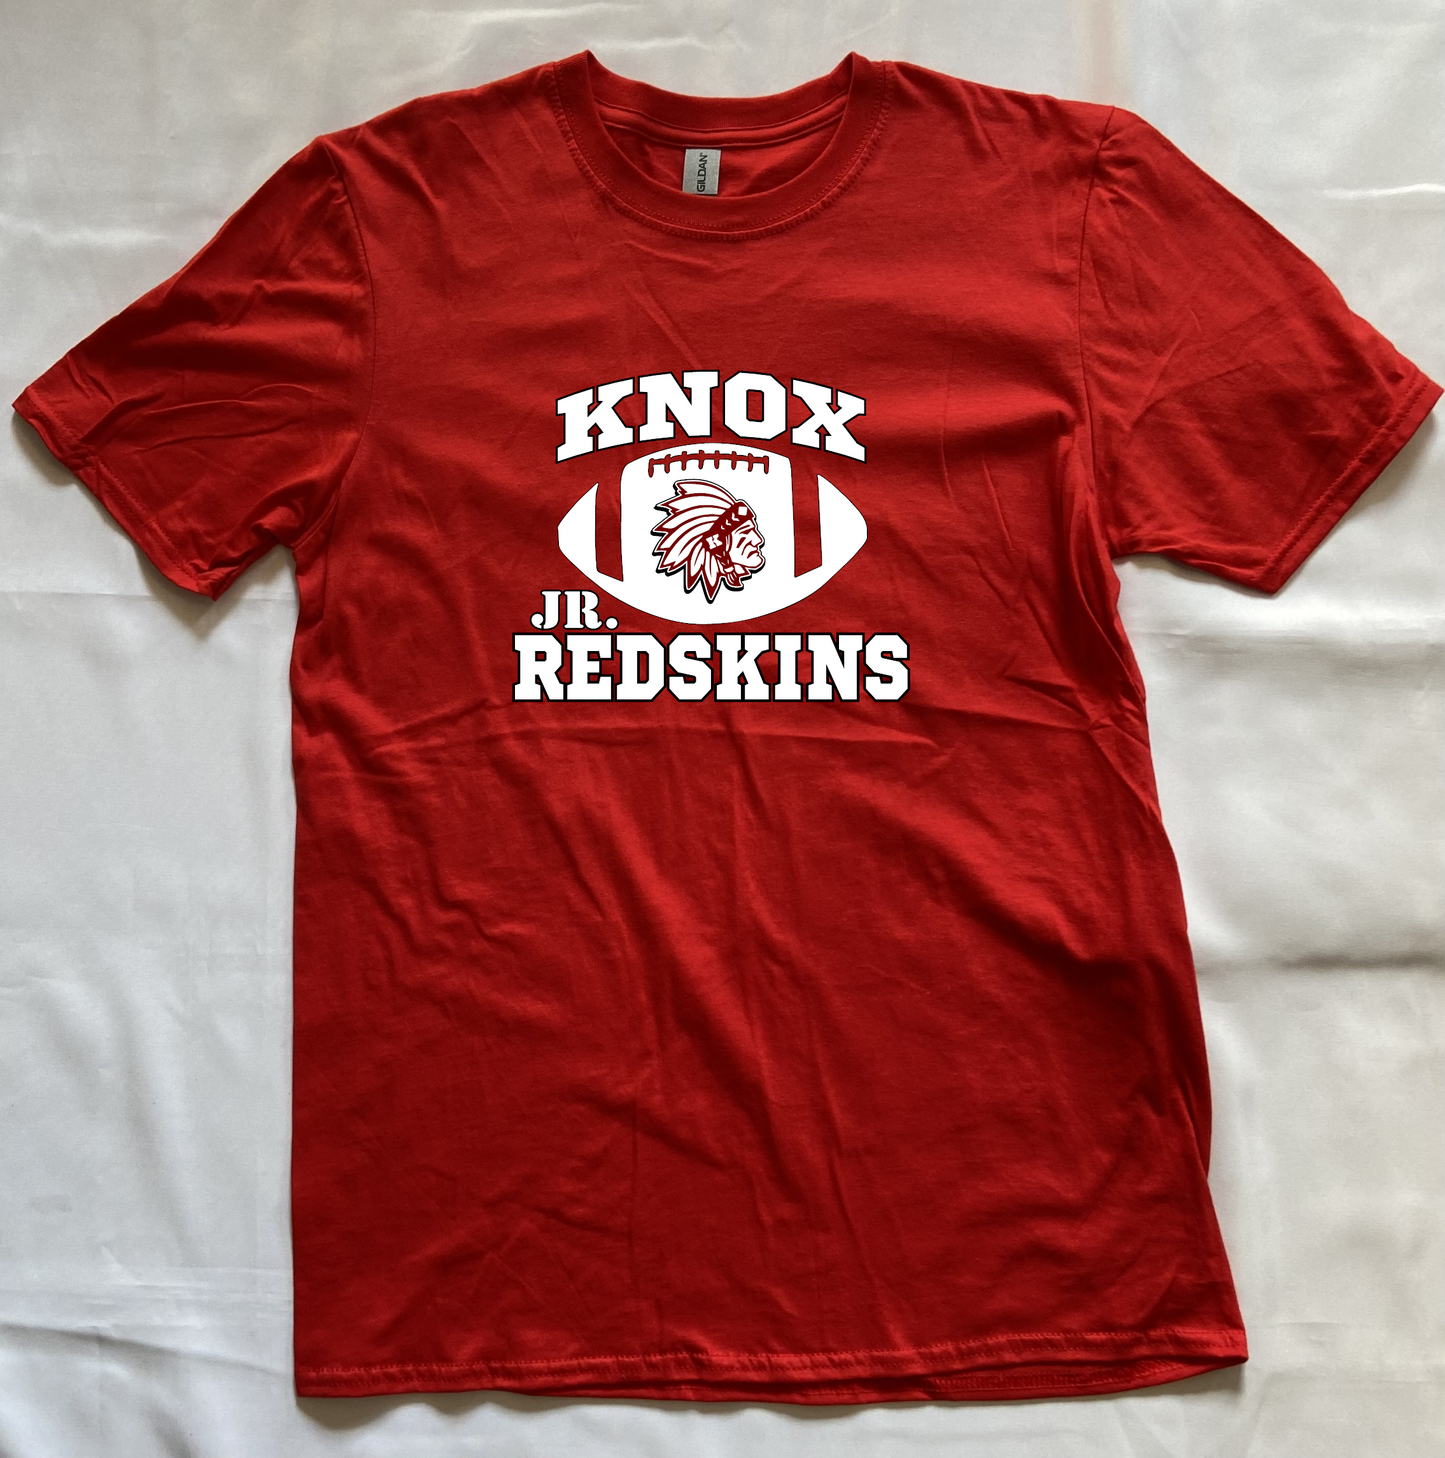 Knox Jr. Redskins Football T-shirt - Red - Adult and Youth Sizes